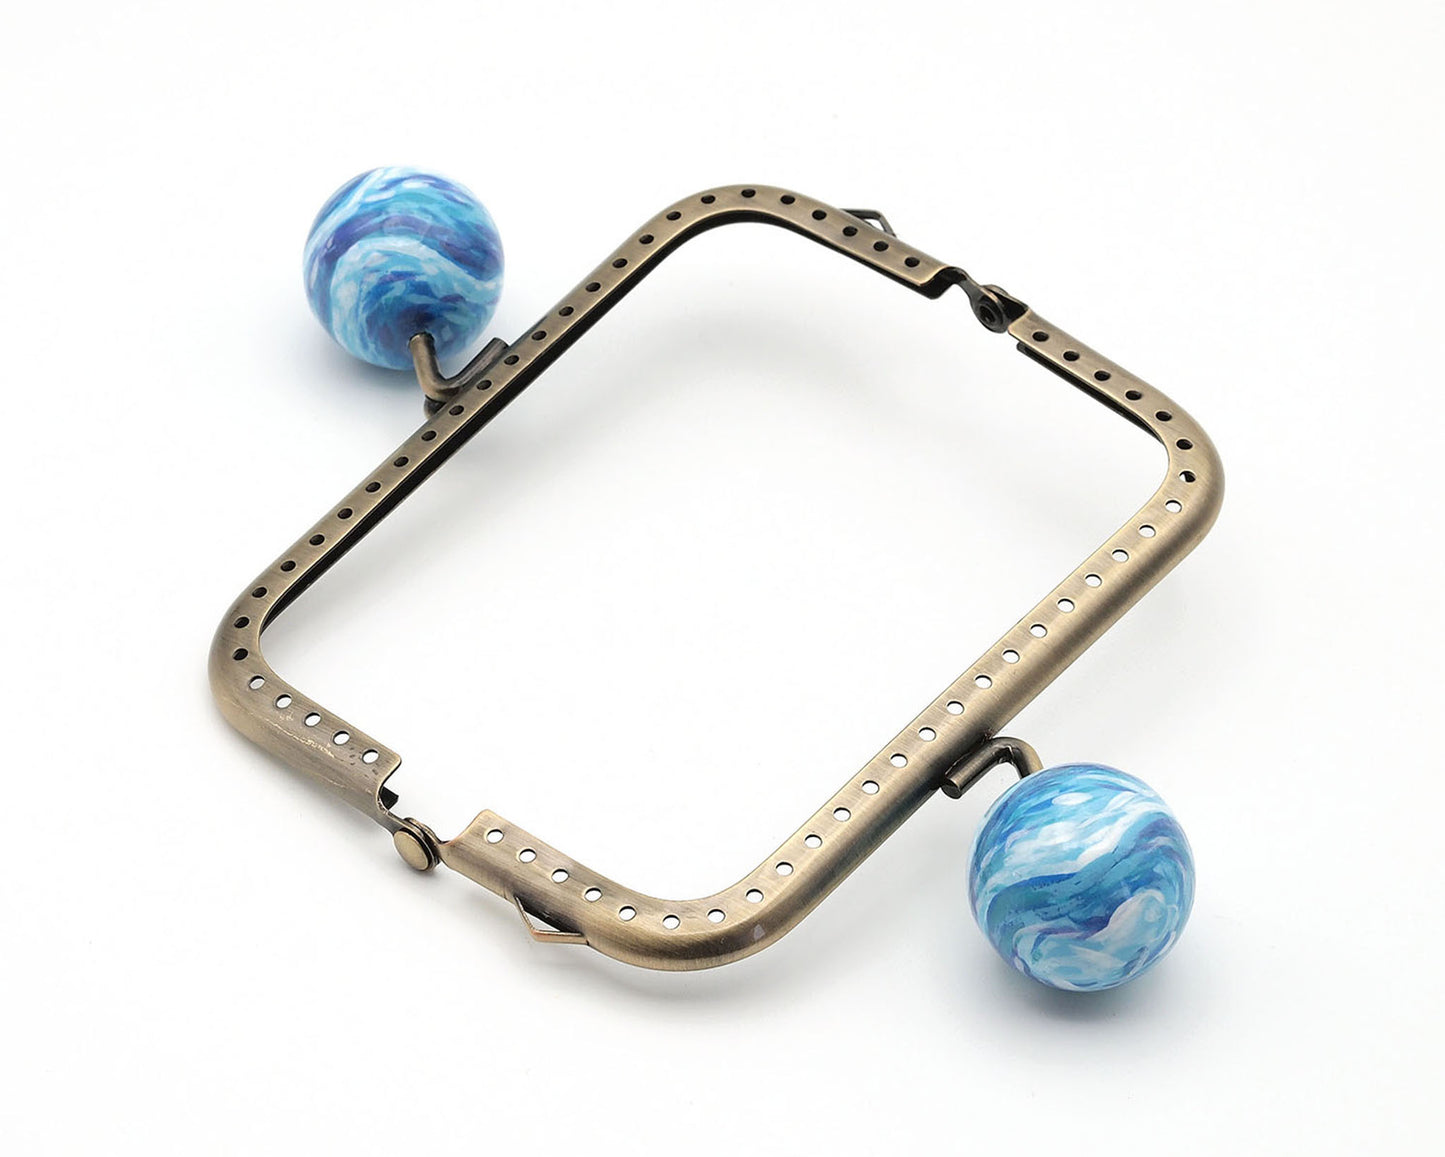 OCEAN purse frame. Hand painted special edition. 10.5cm